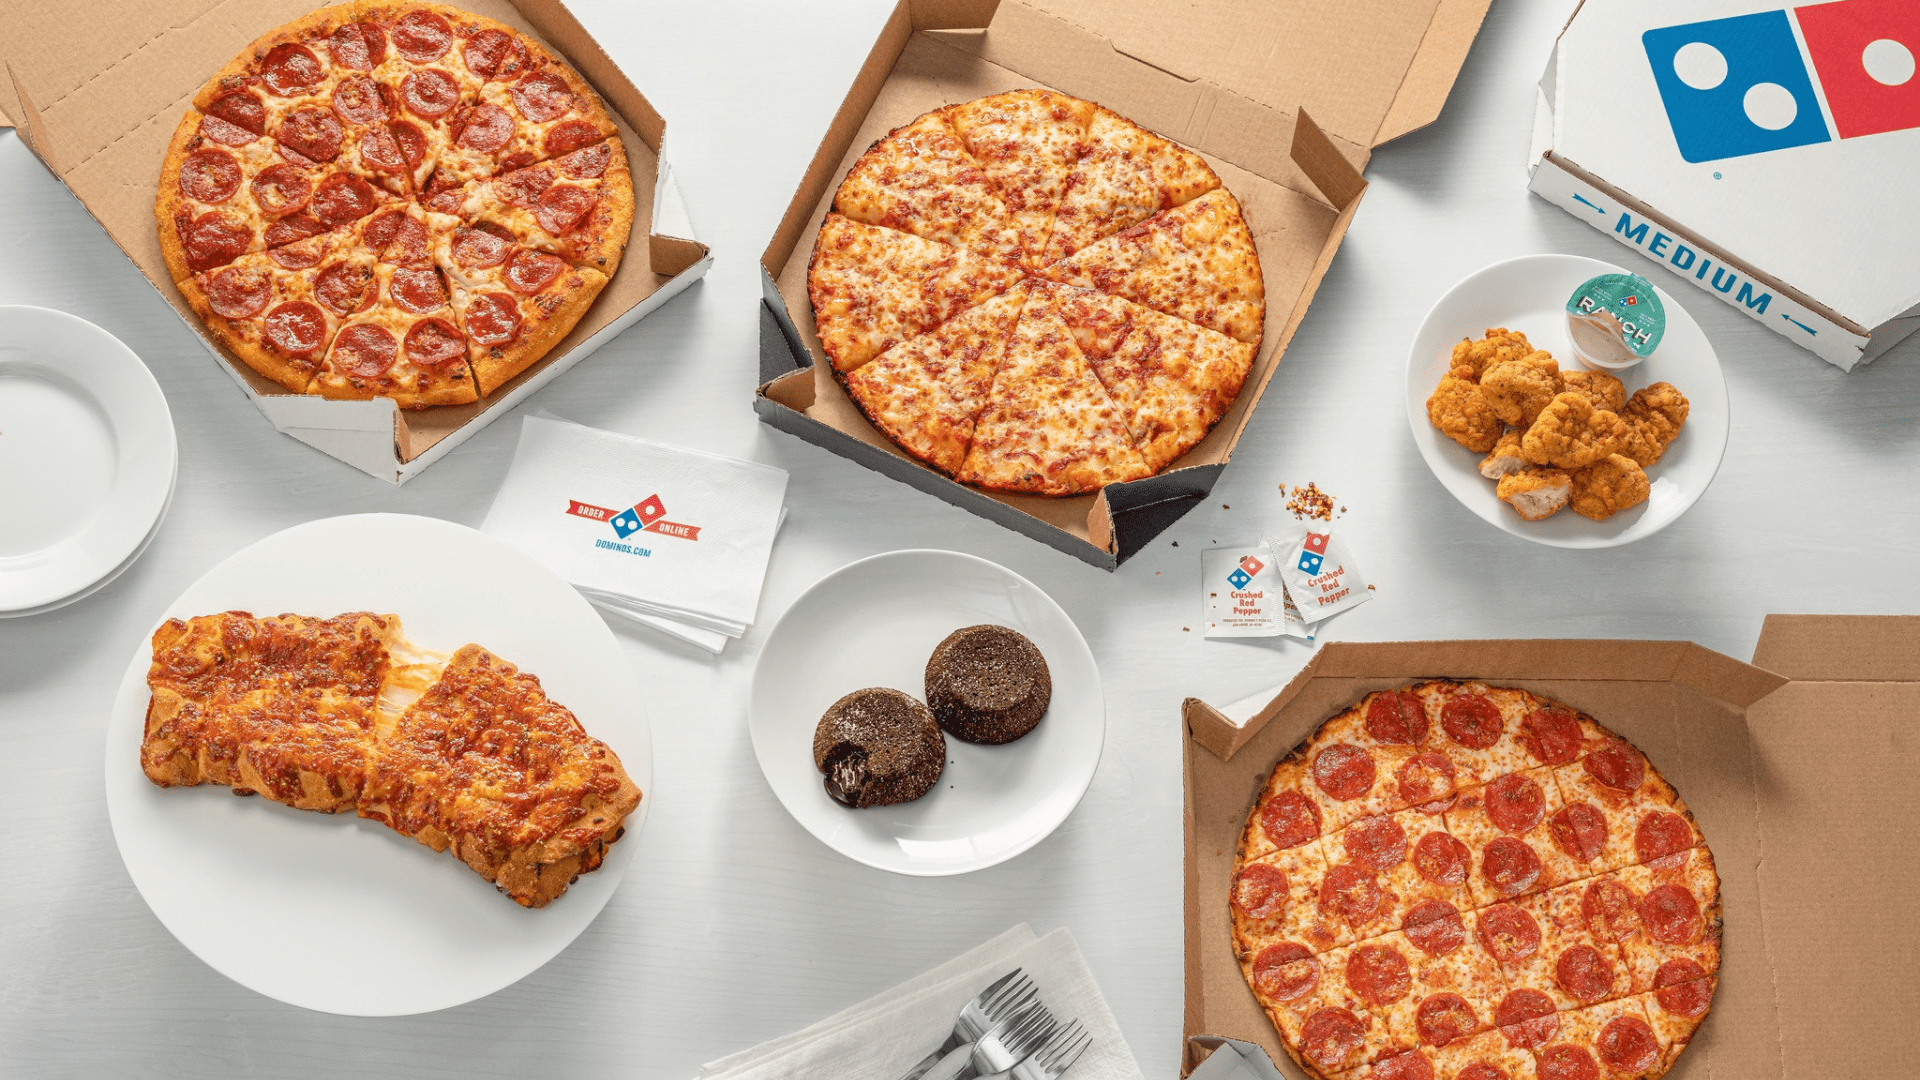 Domino's pizza and food